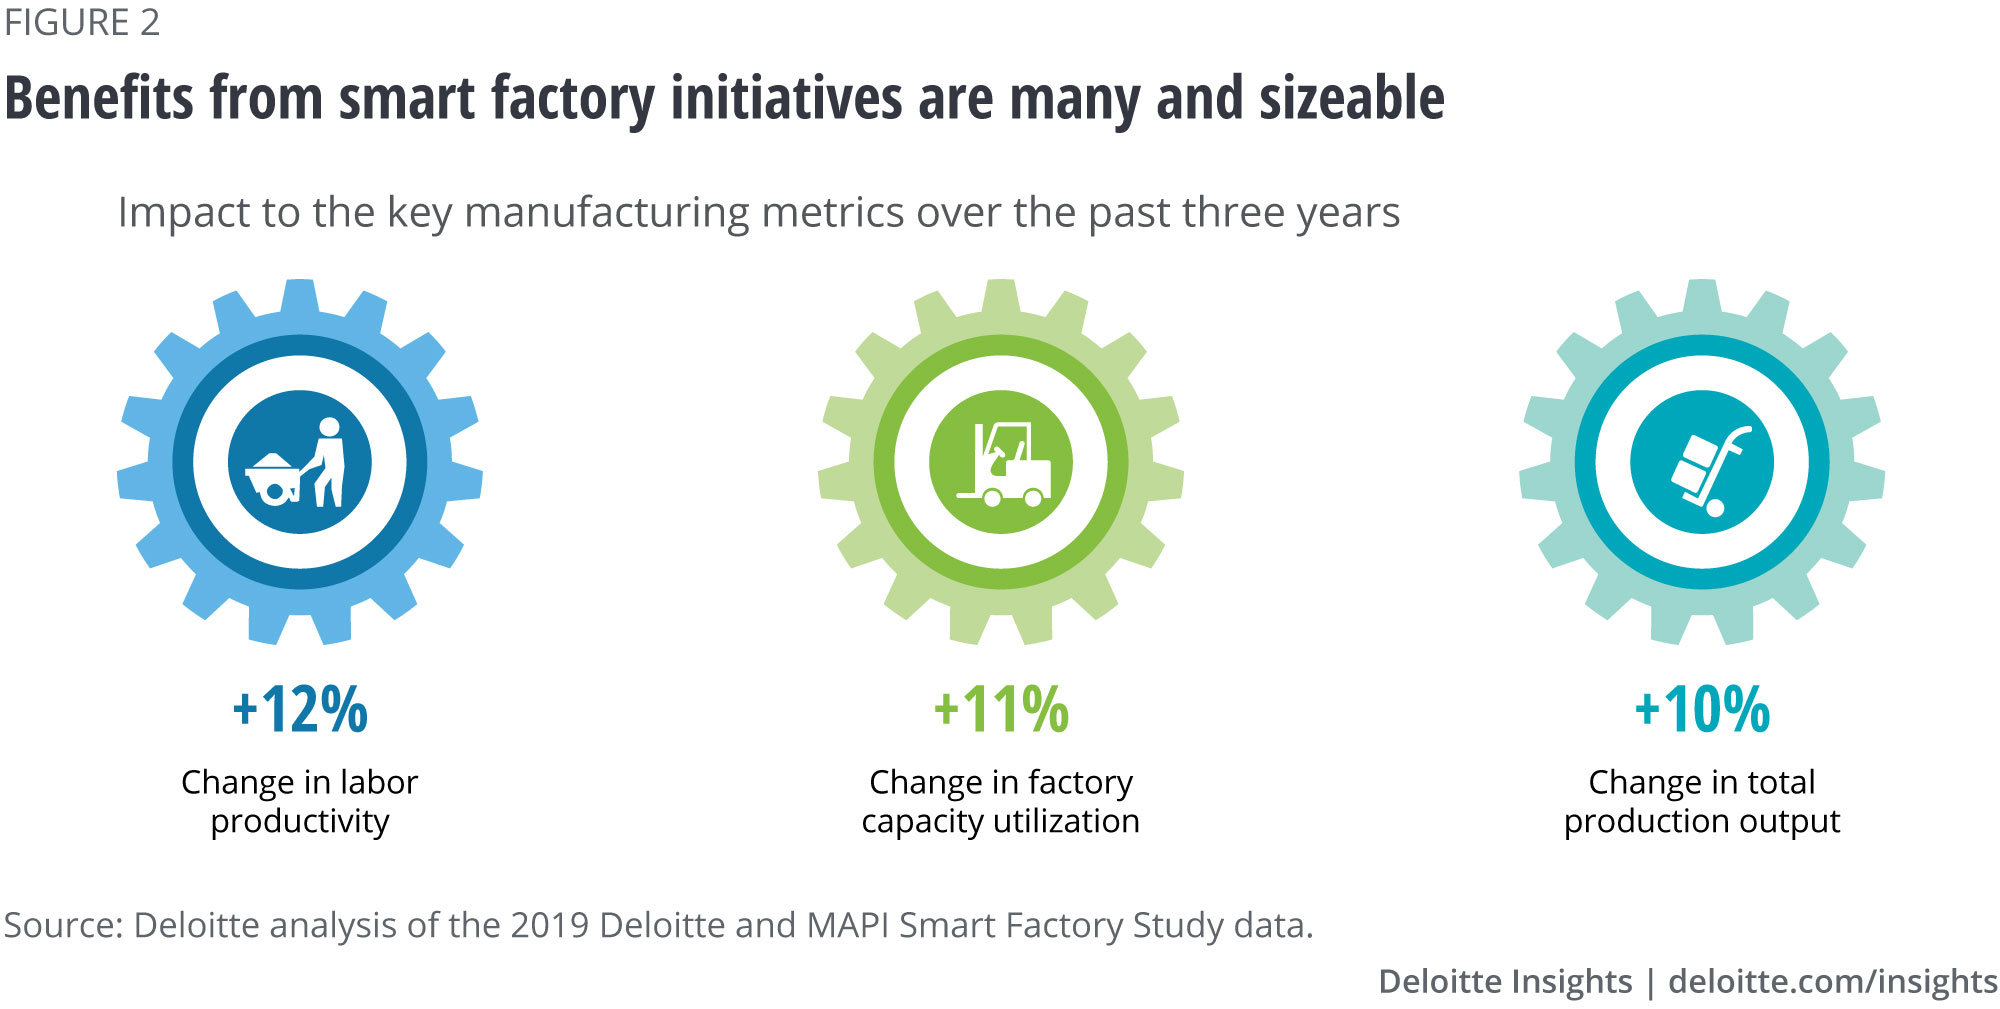 Benefits from smart factory initiatives are many and sizeable